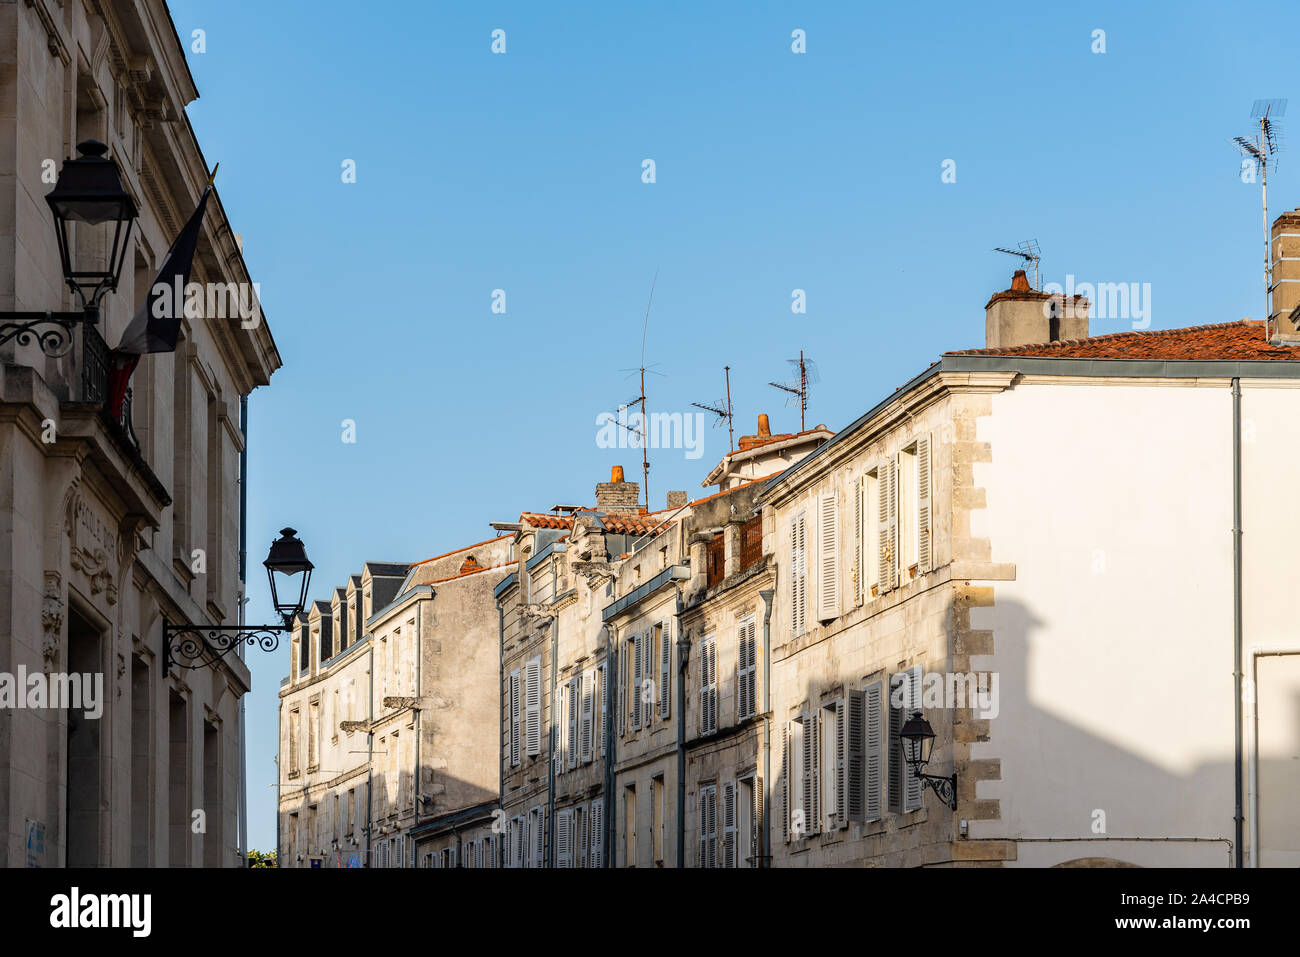 Decadent old residential buildings in the historic centre of La Rochelle, France Stock Photo